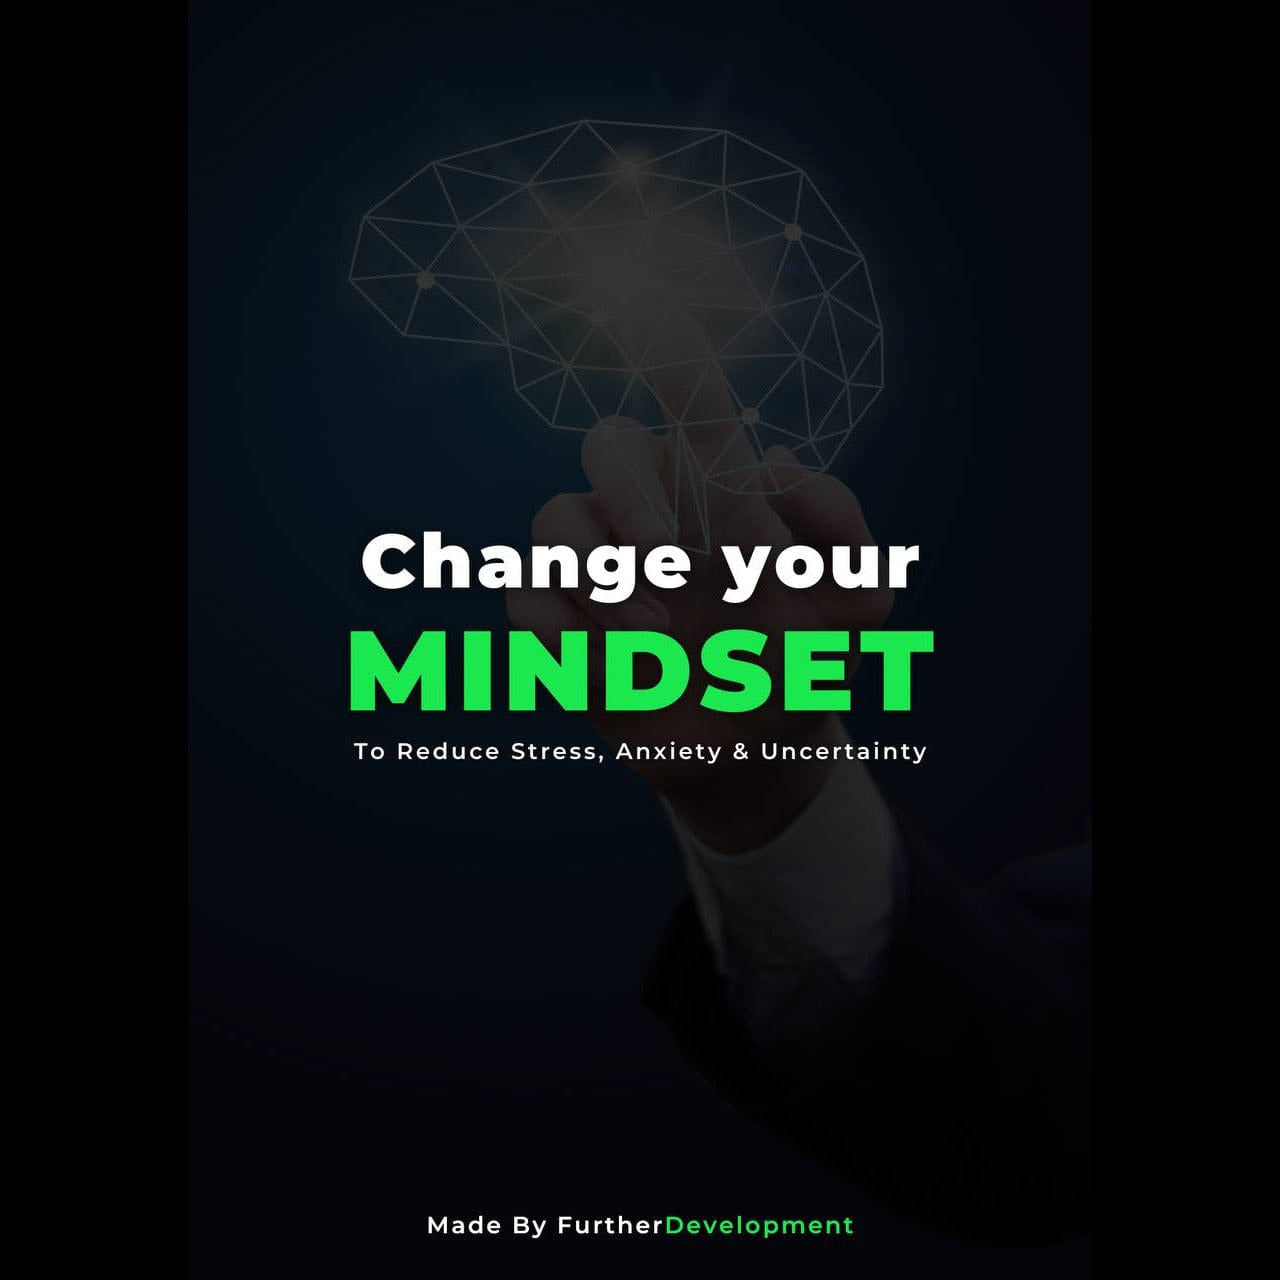 Change your mindset - to reduce stress, anxiety & uncertainty